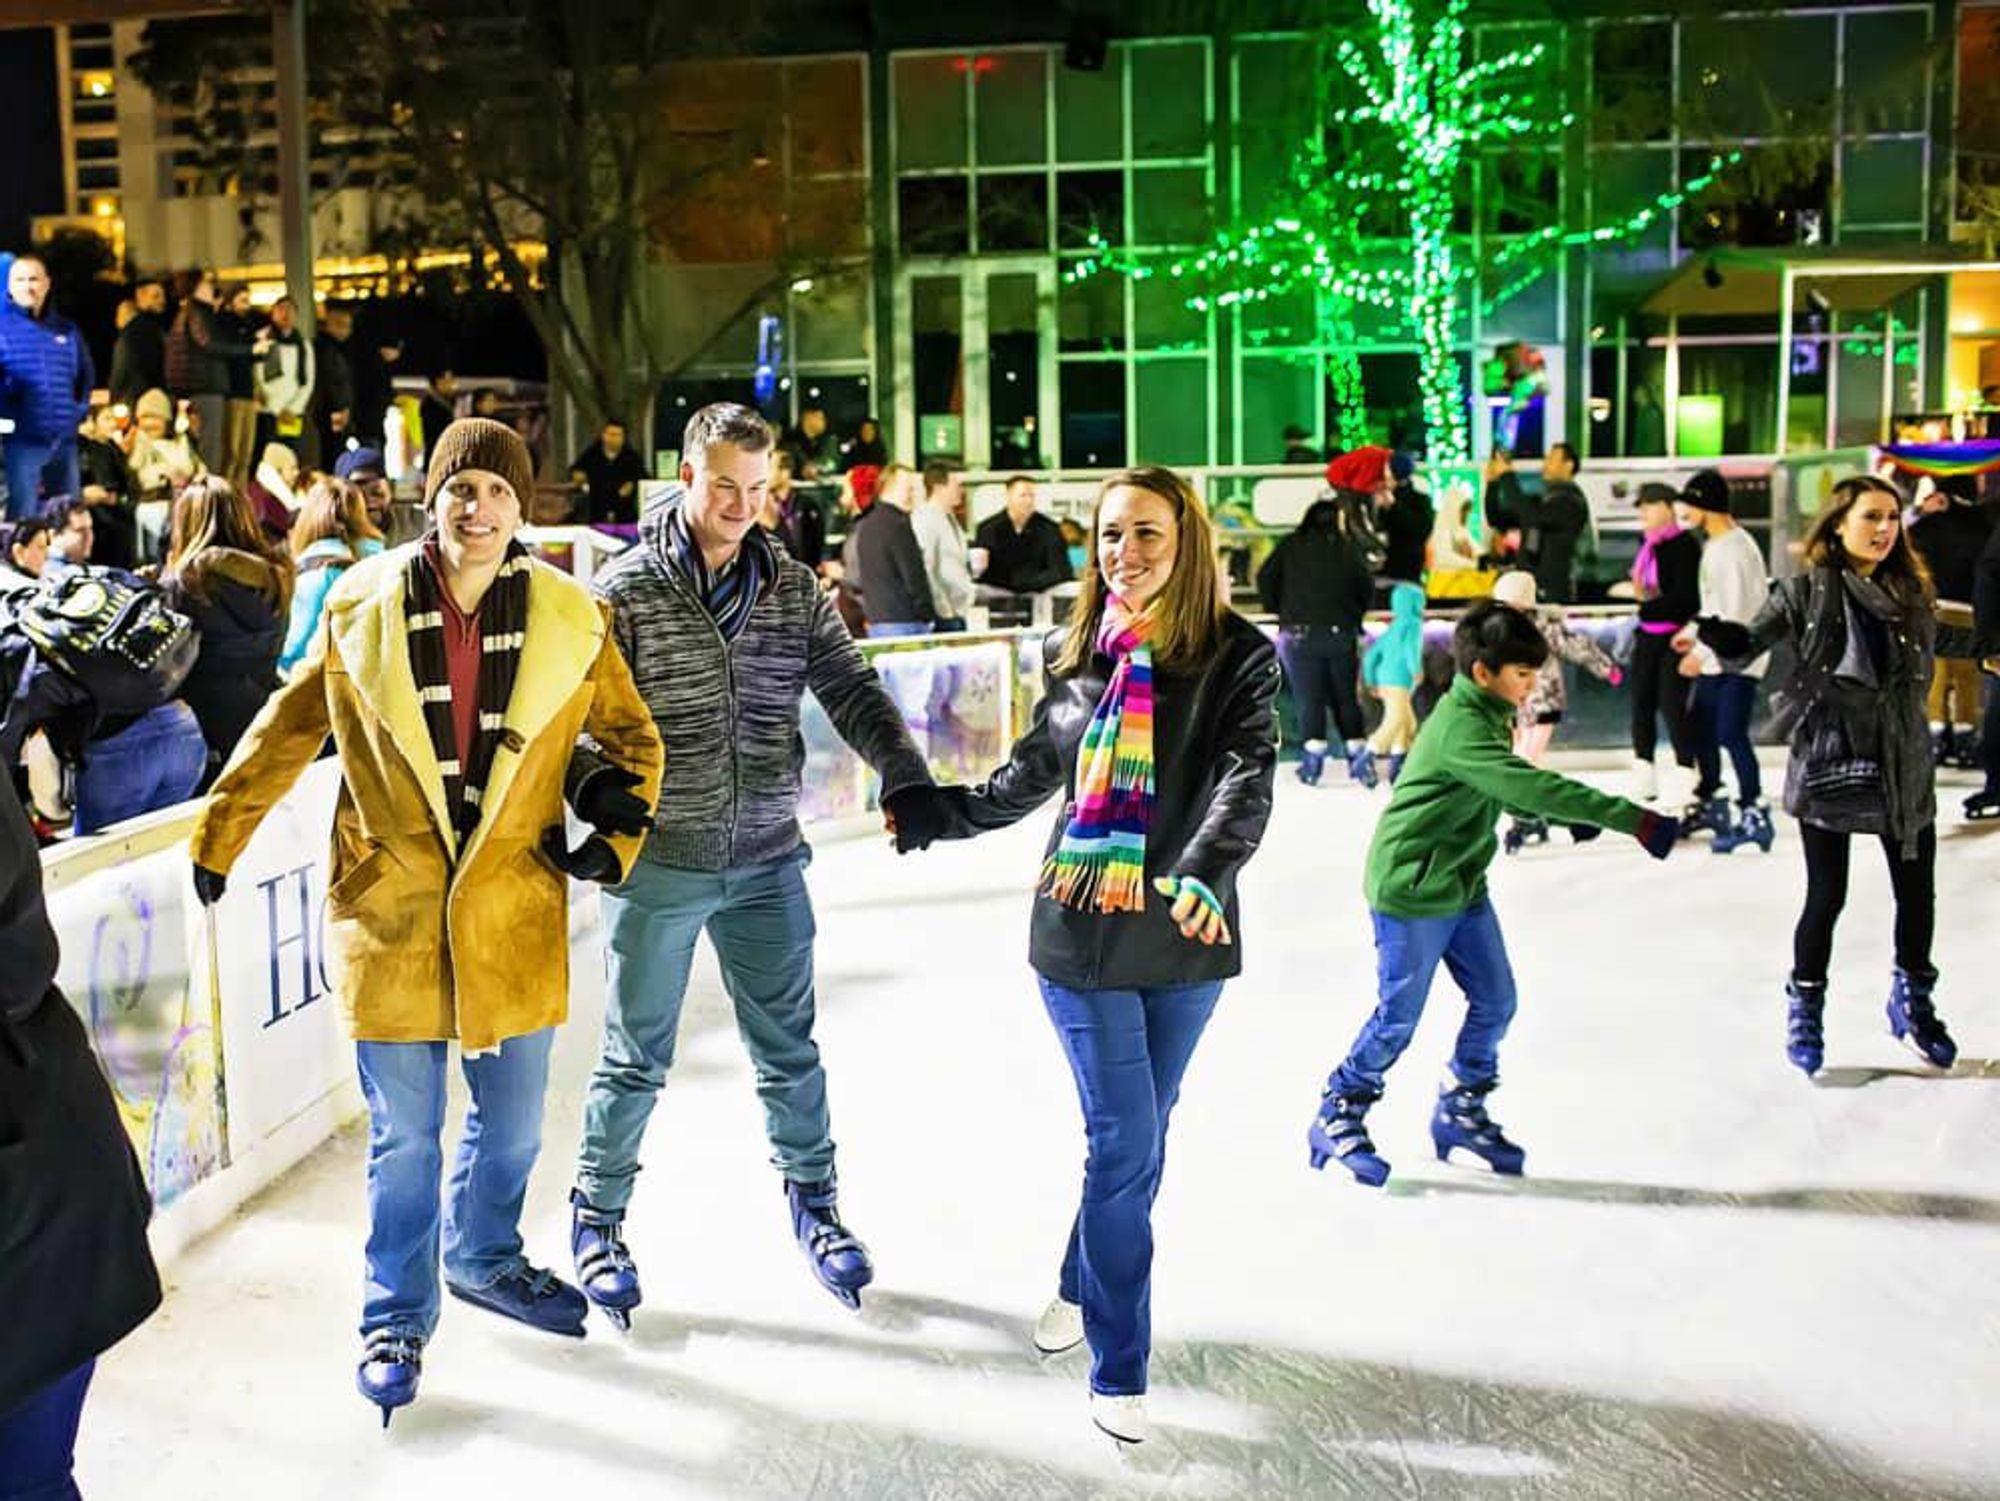 The ICE at Discovery Green ice skating downtown